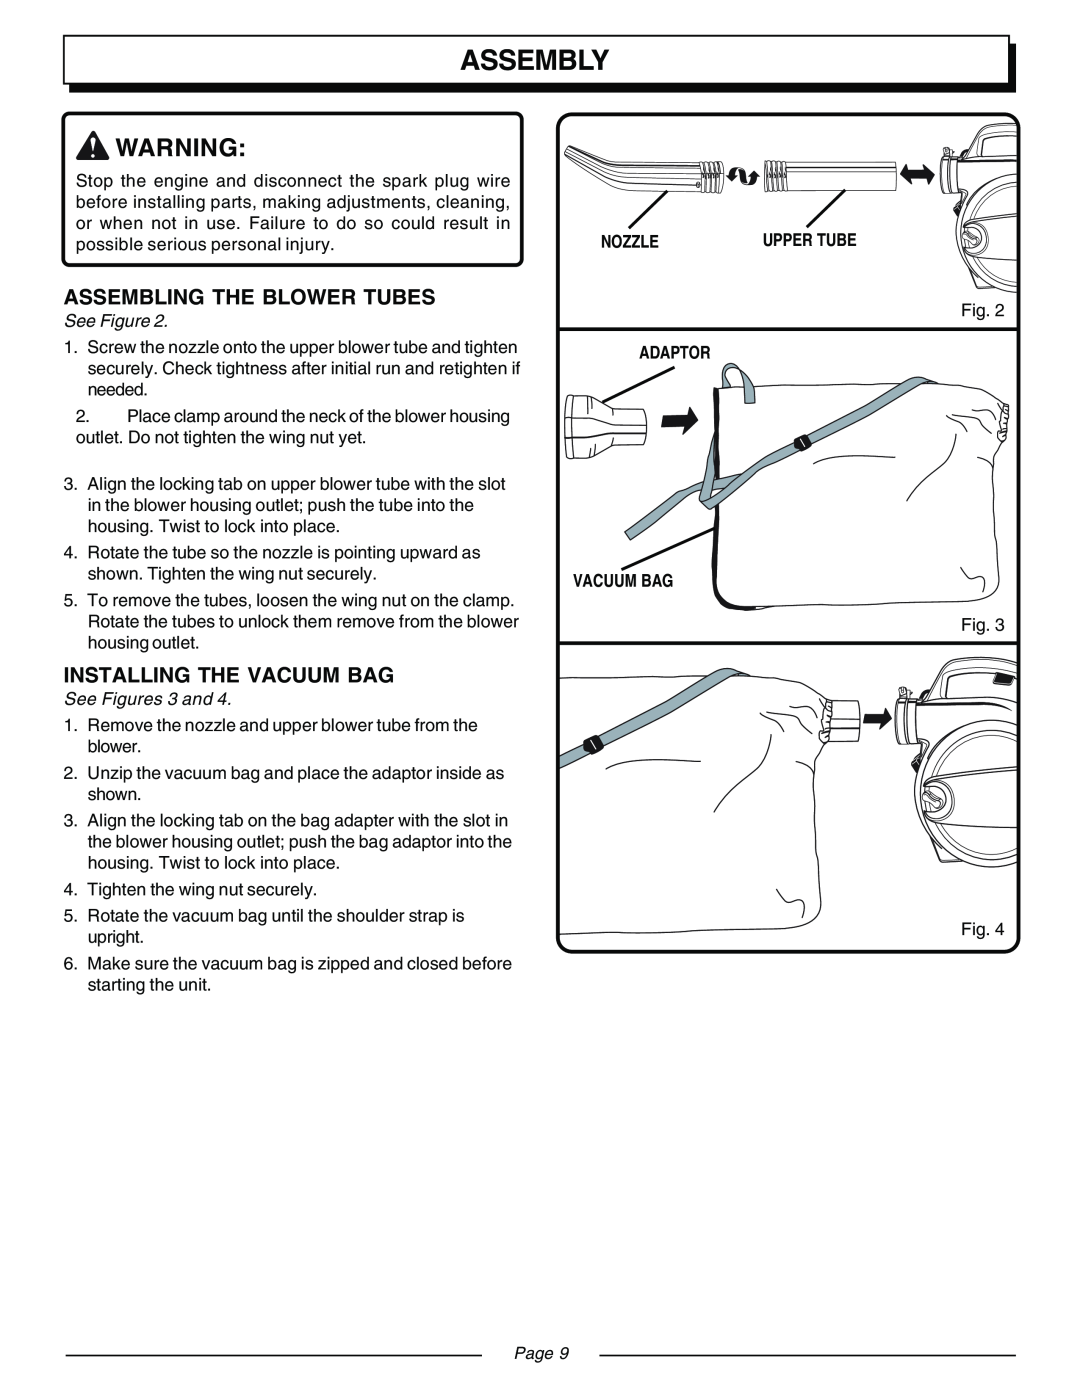 Homelite ZR08107 manual Assembly, See Figures 3 and, Nozzle, Adaptor Vacuum Bag, Page 